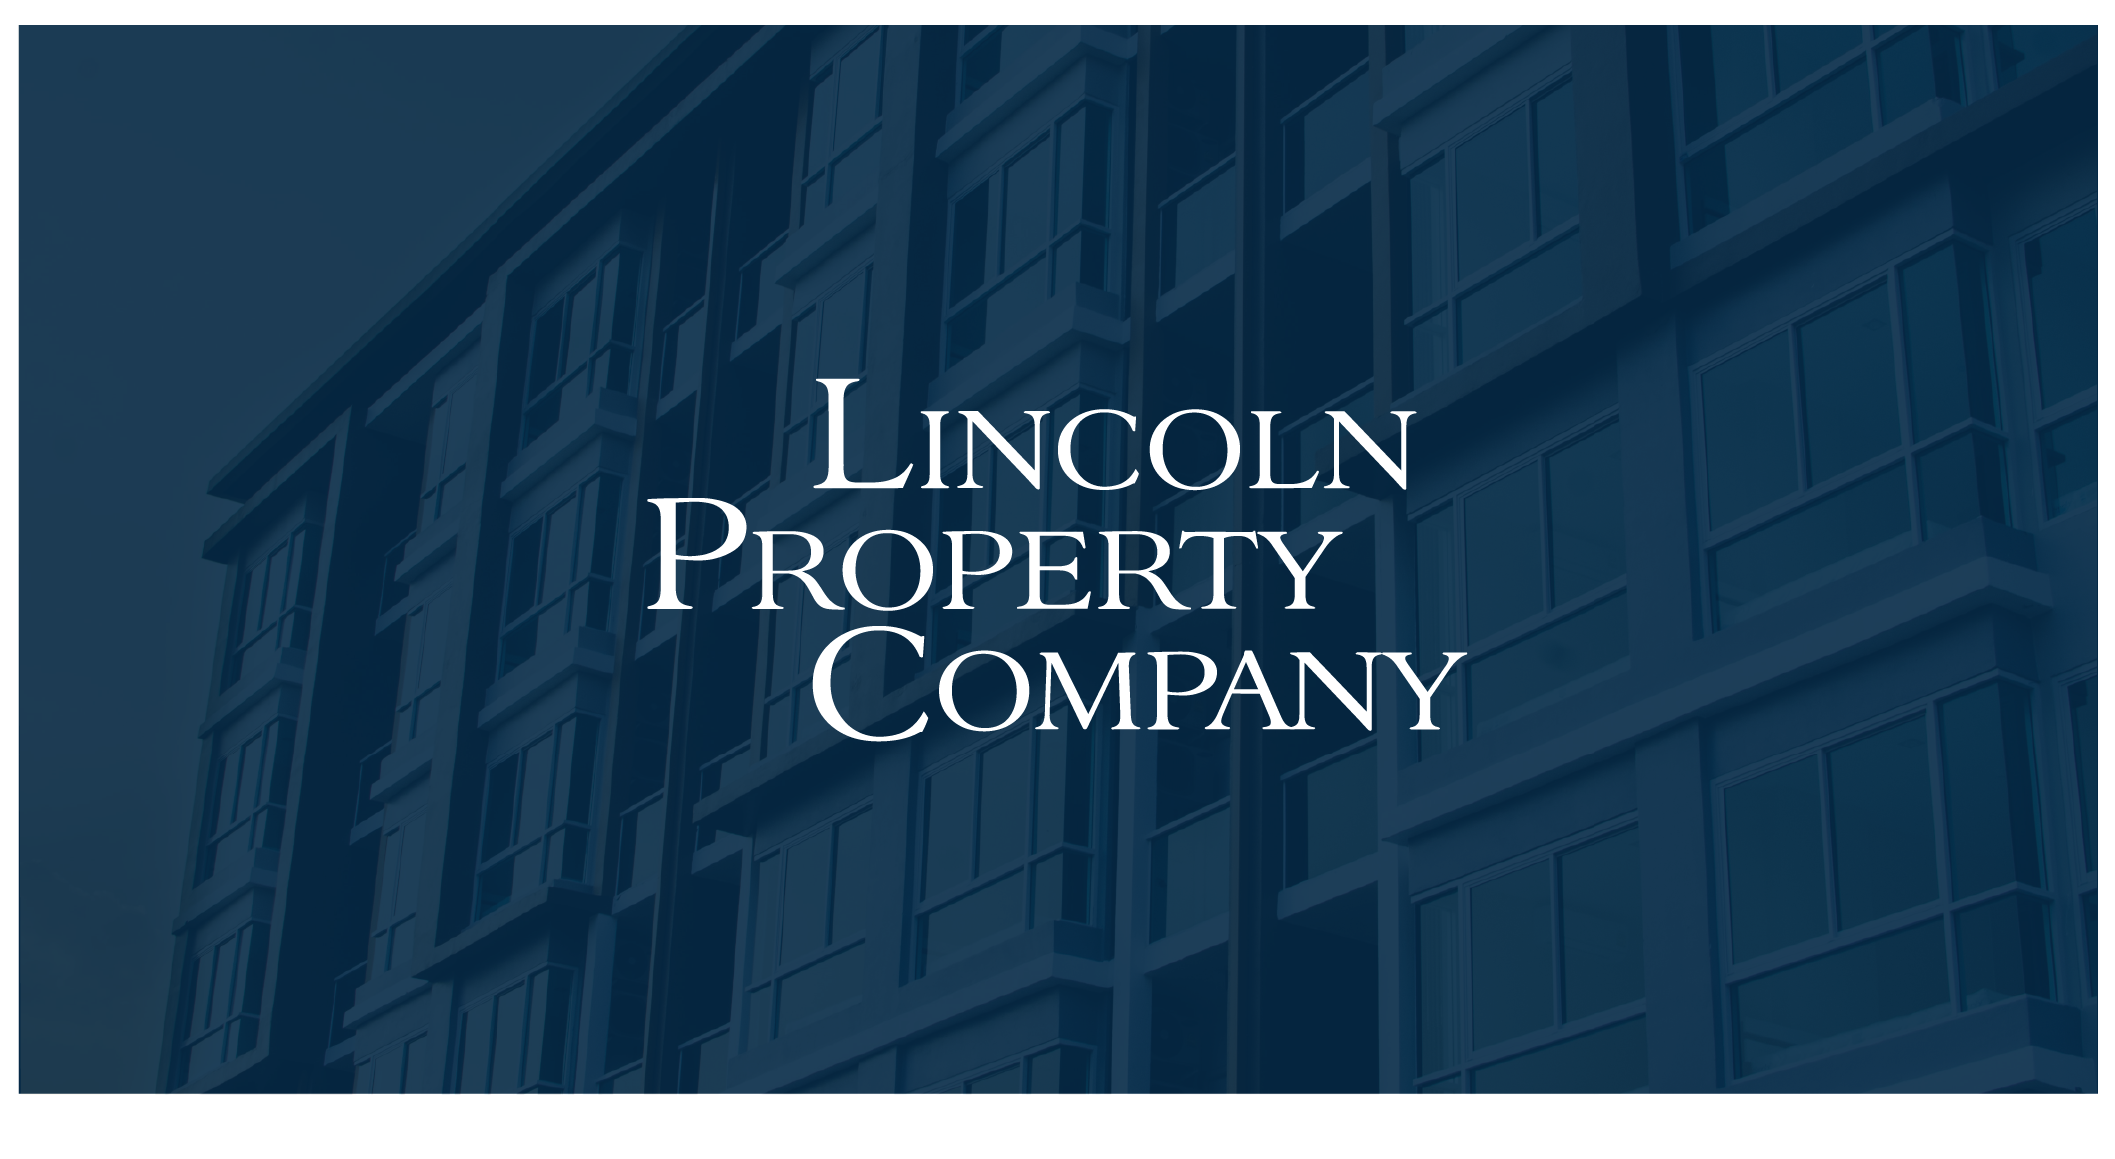 PR-21-07-Lincoln-Property-Company-feature-image-1015x556-V3